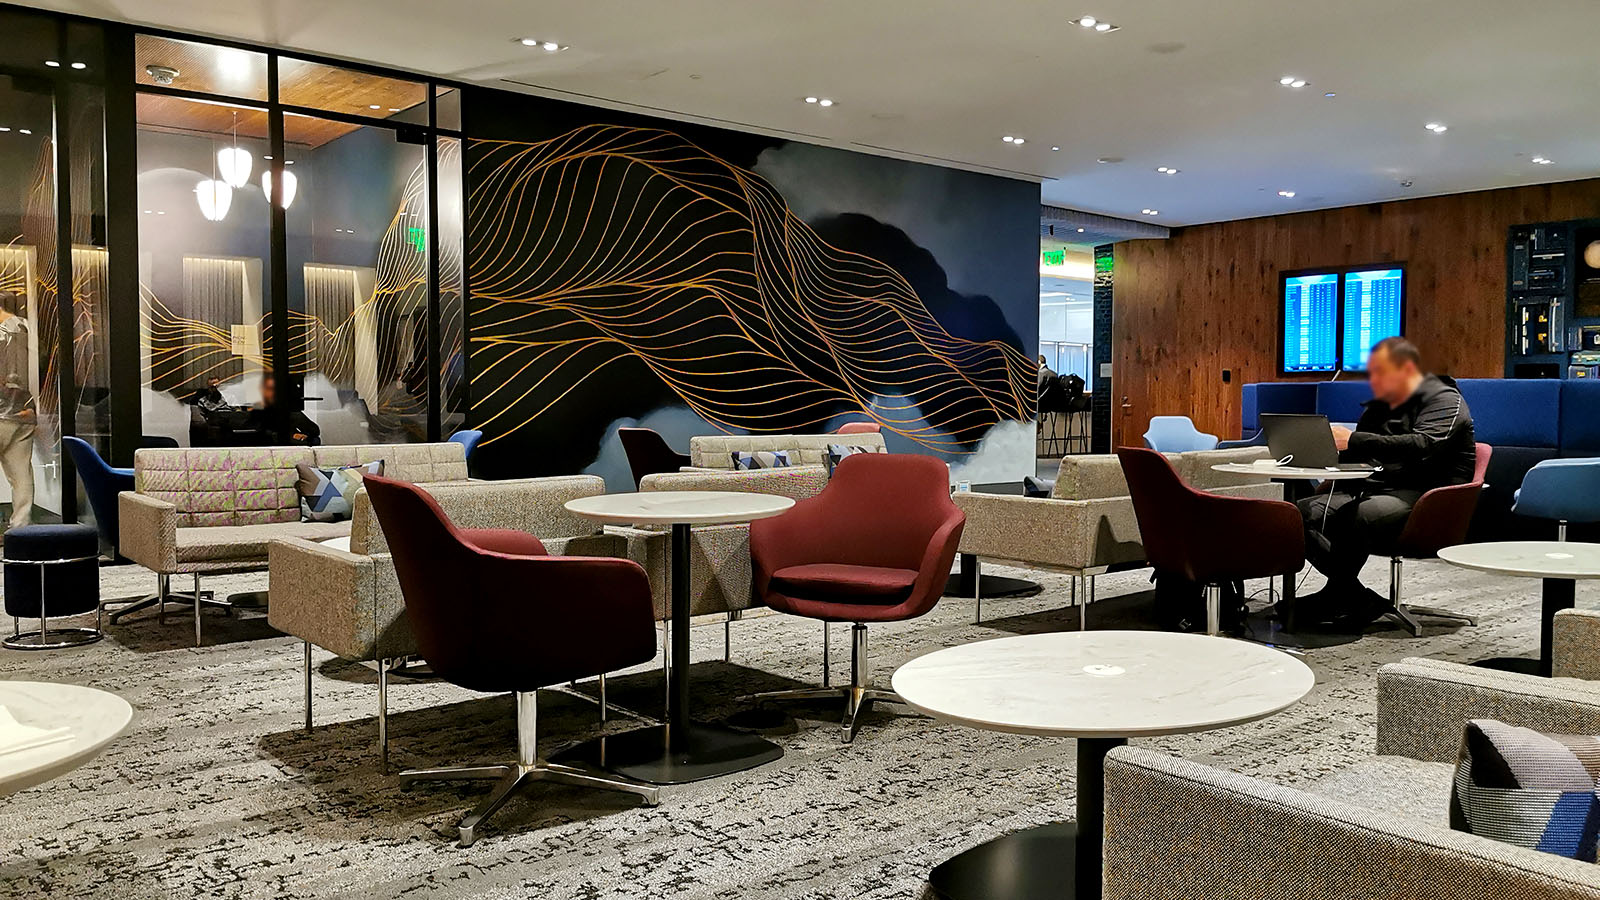 Amex Centurion Lounge, an option for eligible travellers